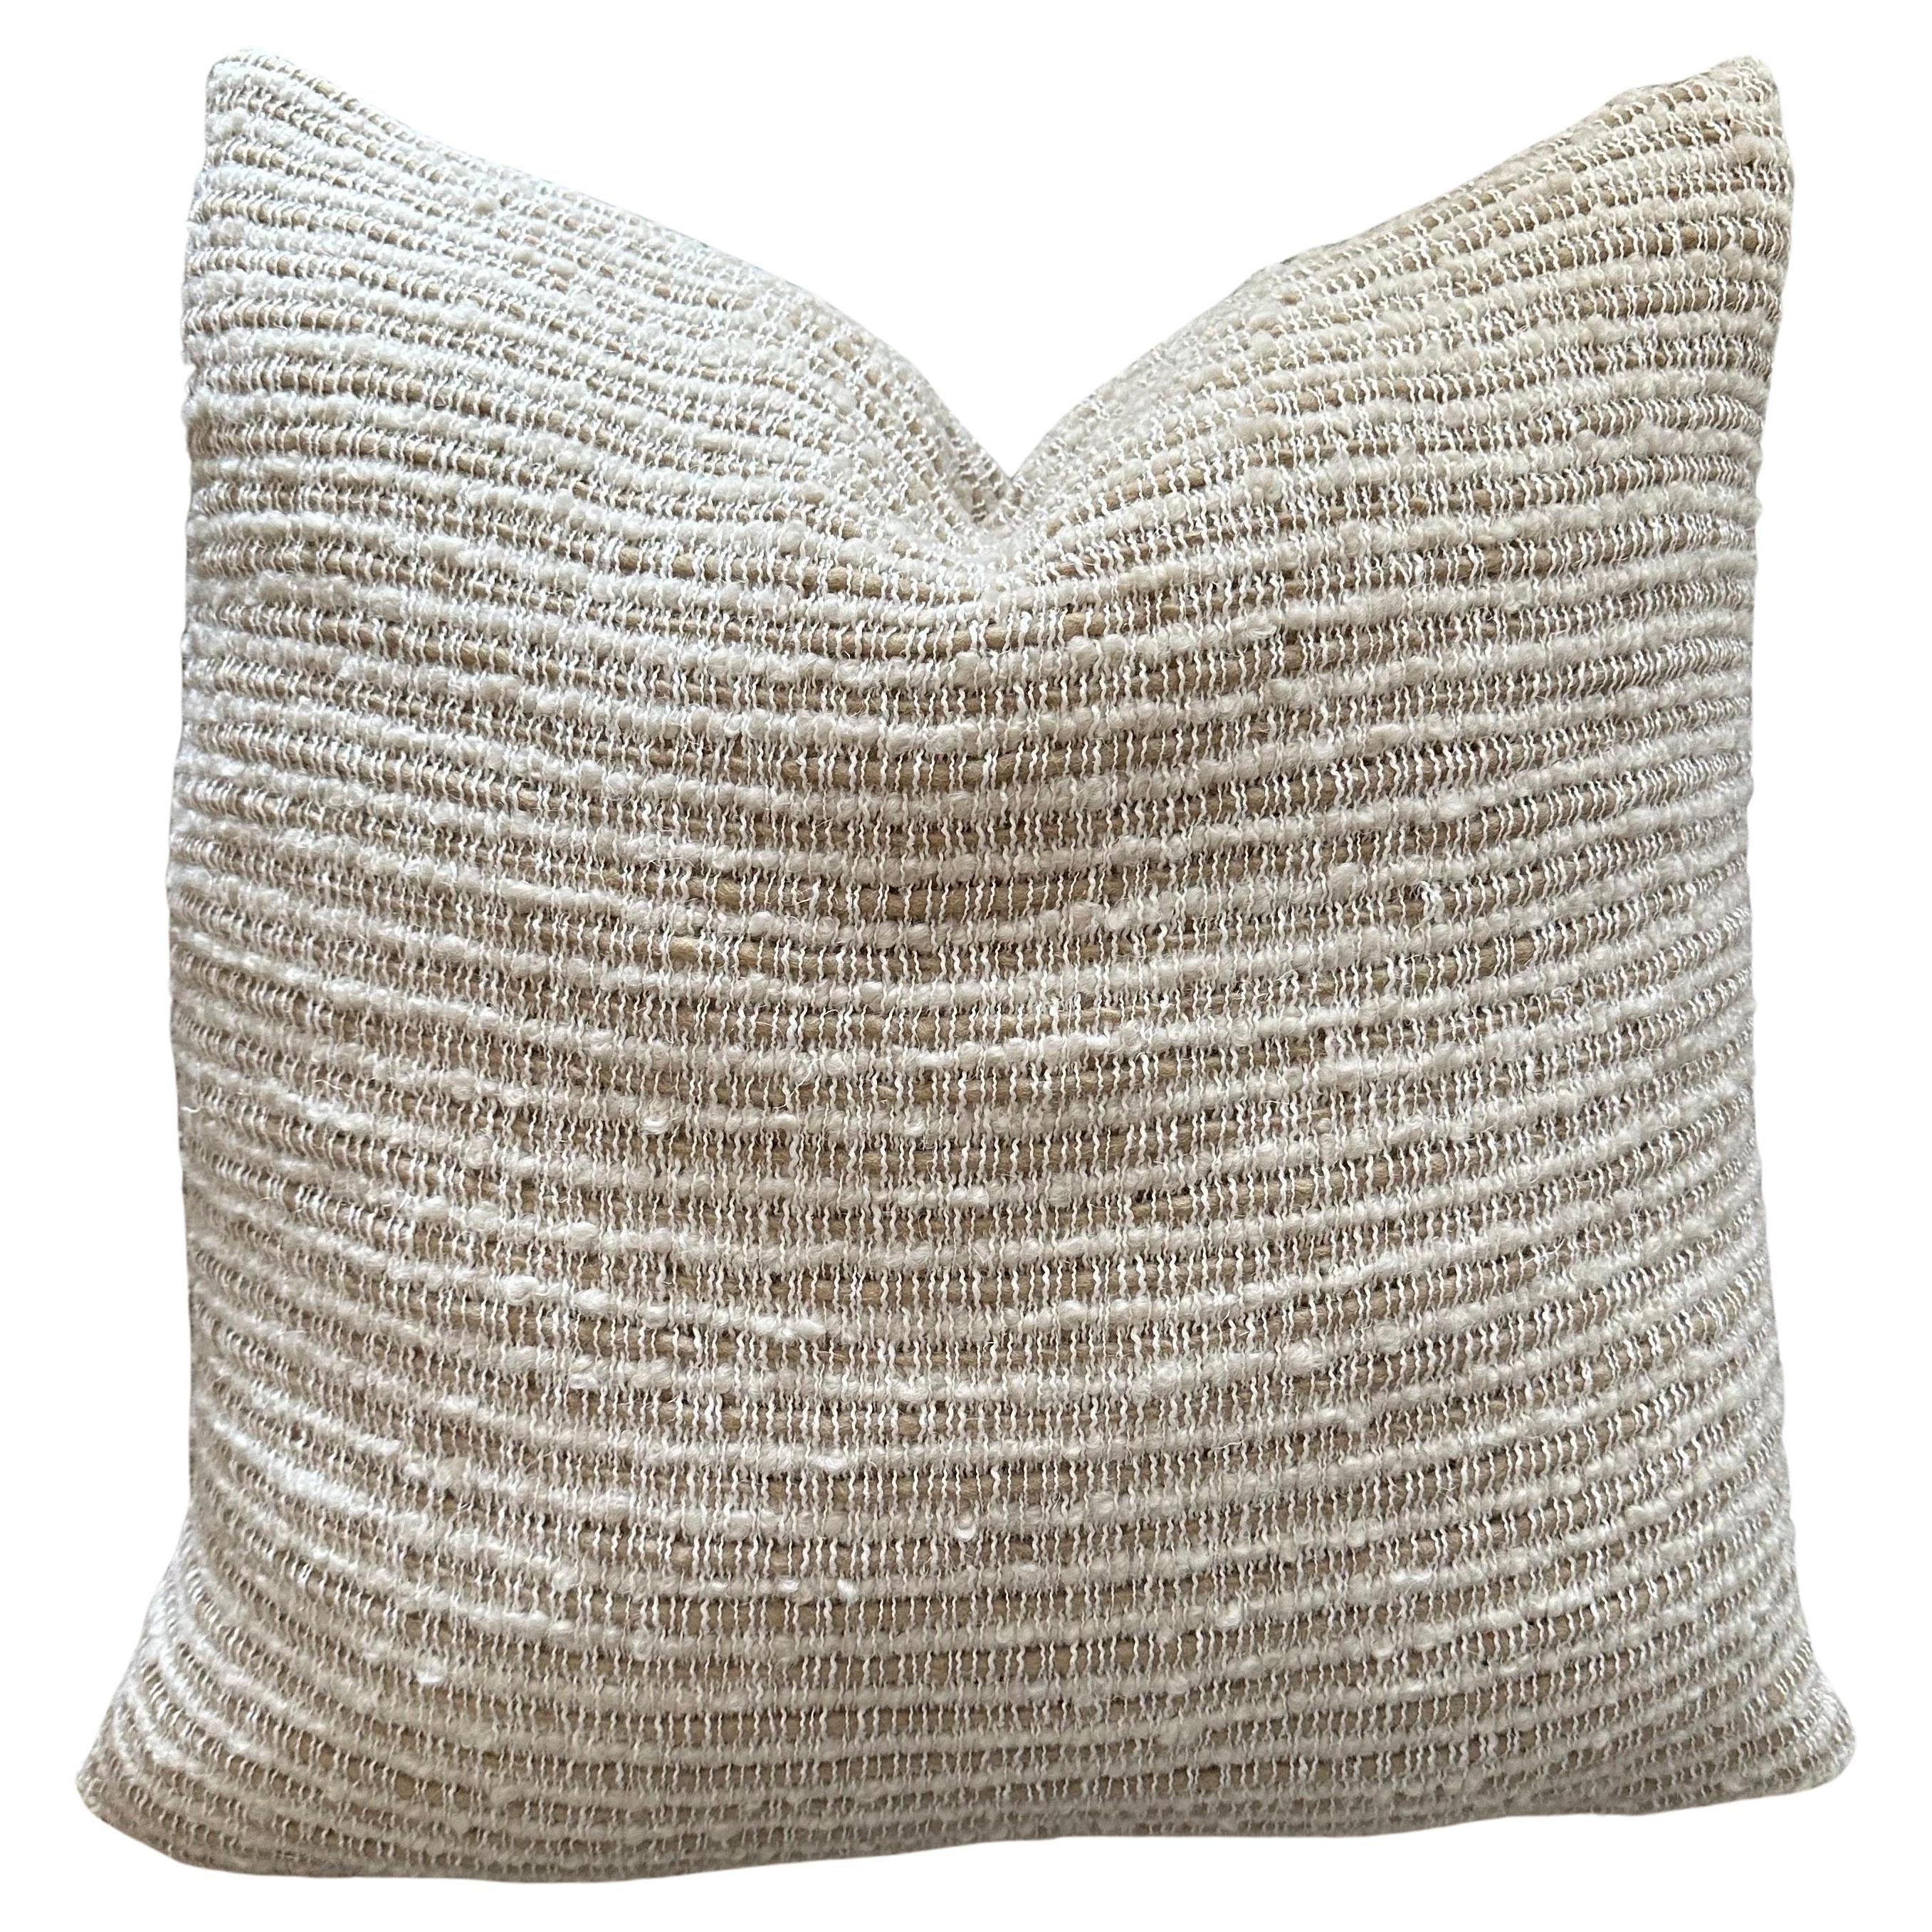 Wool and Linen Accent Pillow with Down Feather Insert For Sale 8